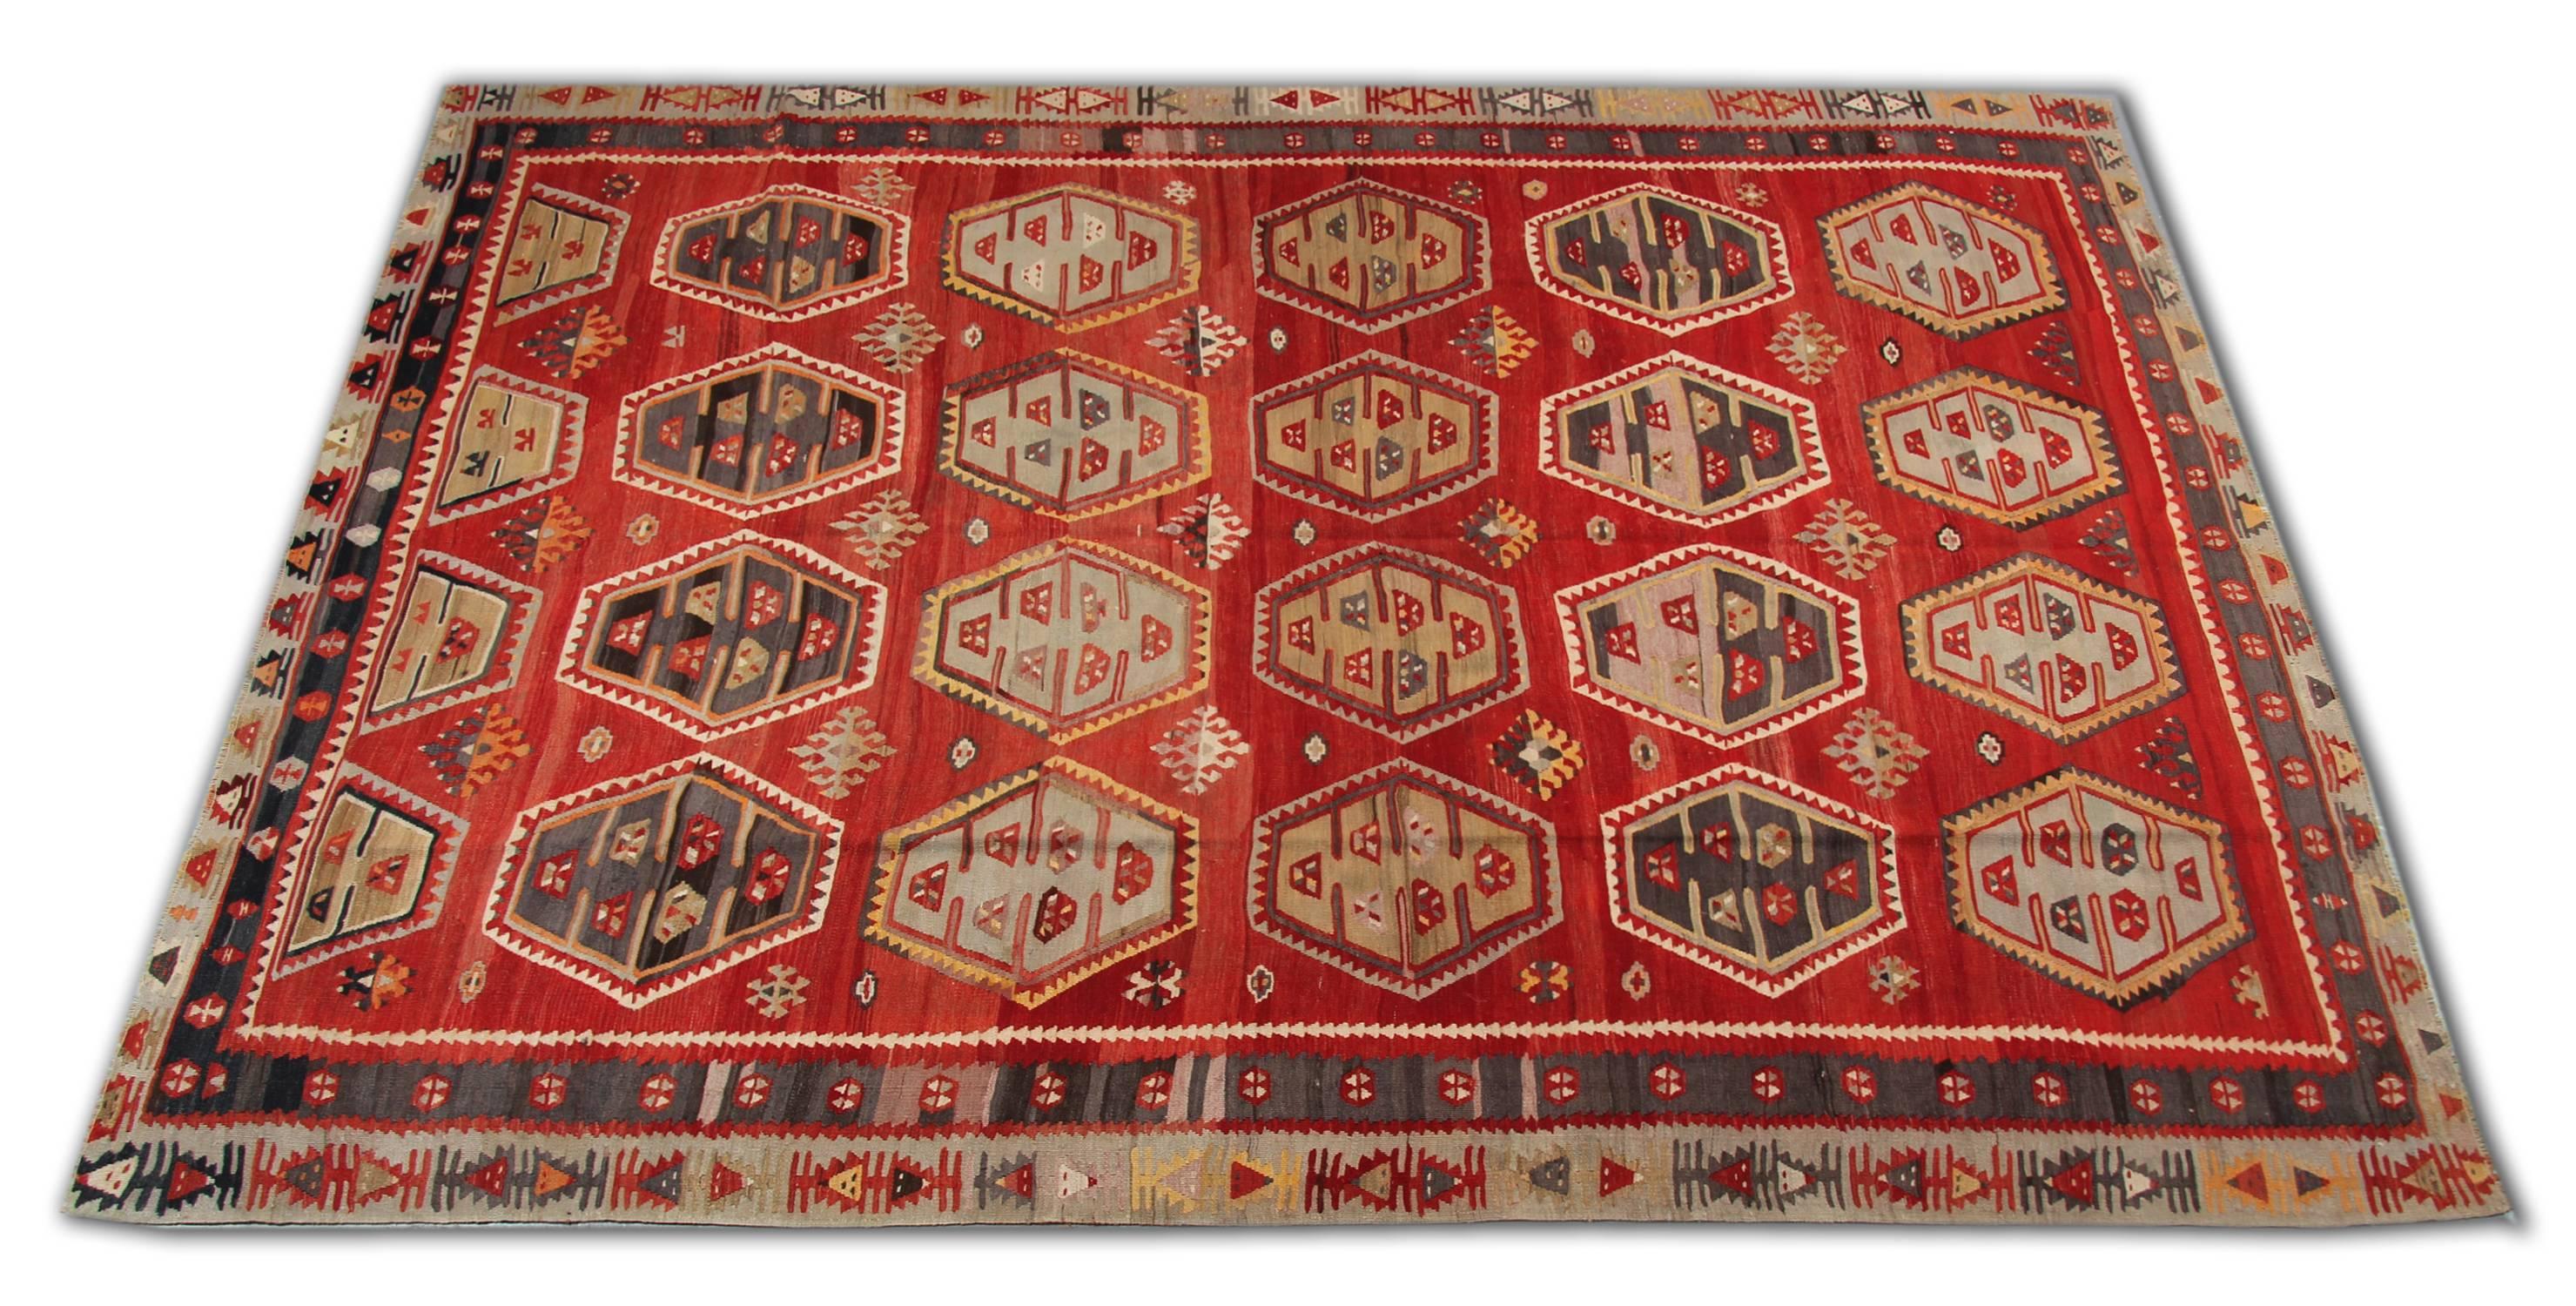 Sarkisla Kilims are handmade carpet from Sivas and are, on the whole, loosely woven in slit weave and generally of a coarse texture. The Sarkilsa Kilim rugs are one of the most decorative rugs, Turkish Kilim can be an additional element of oriental